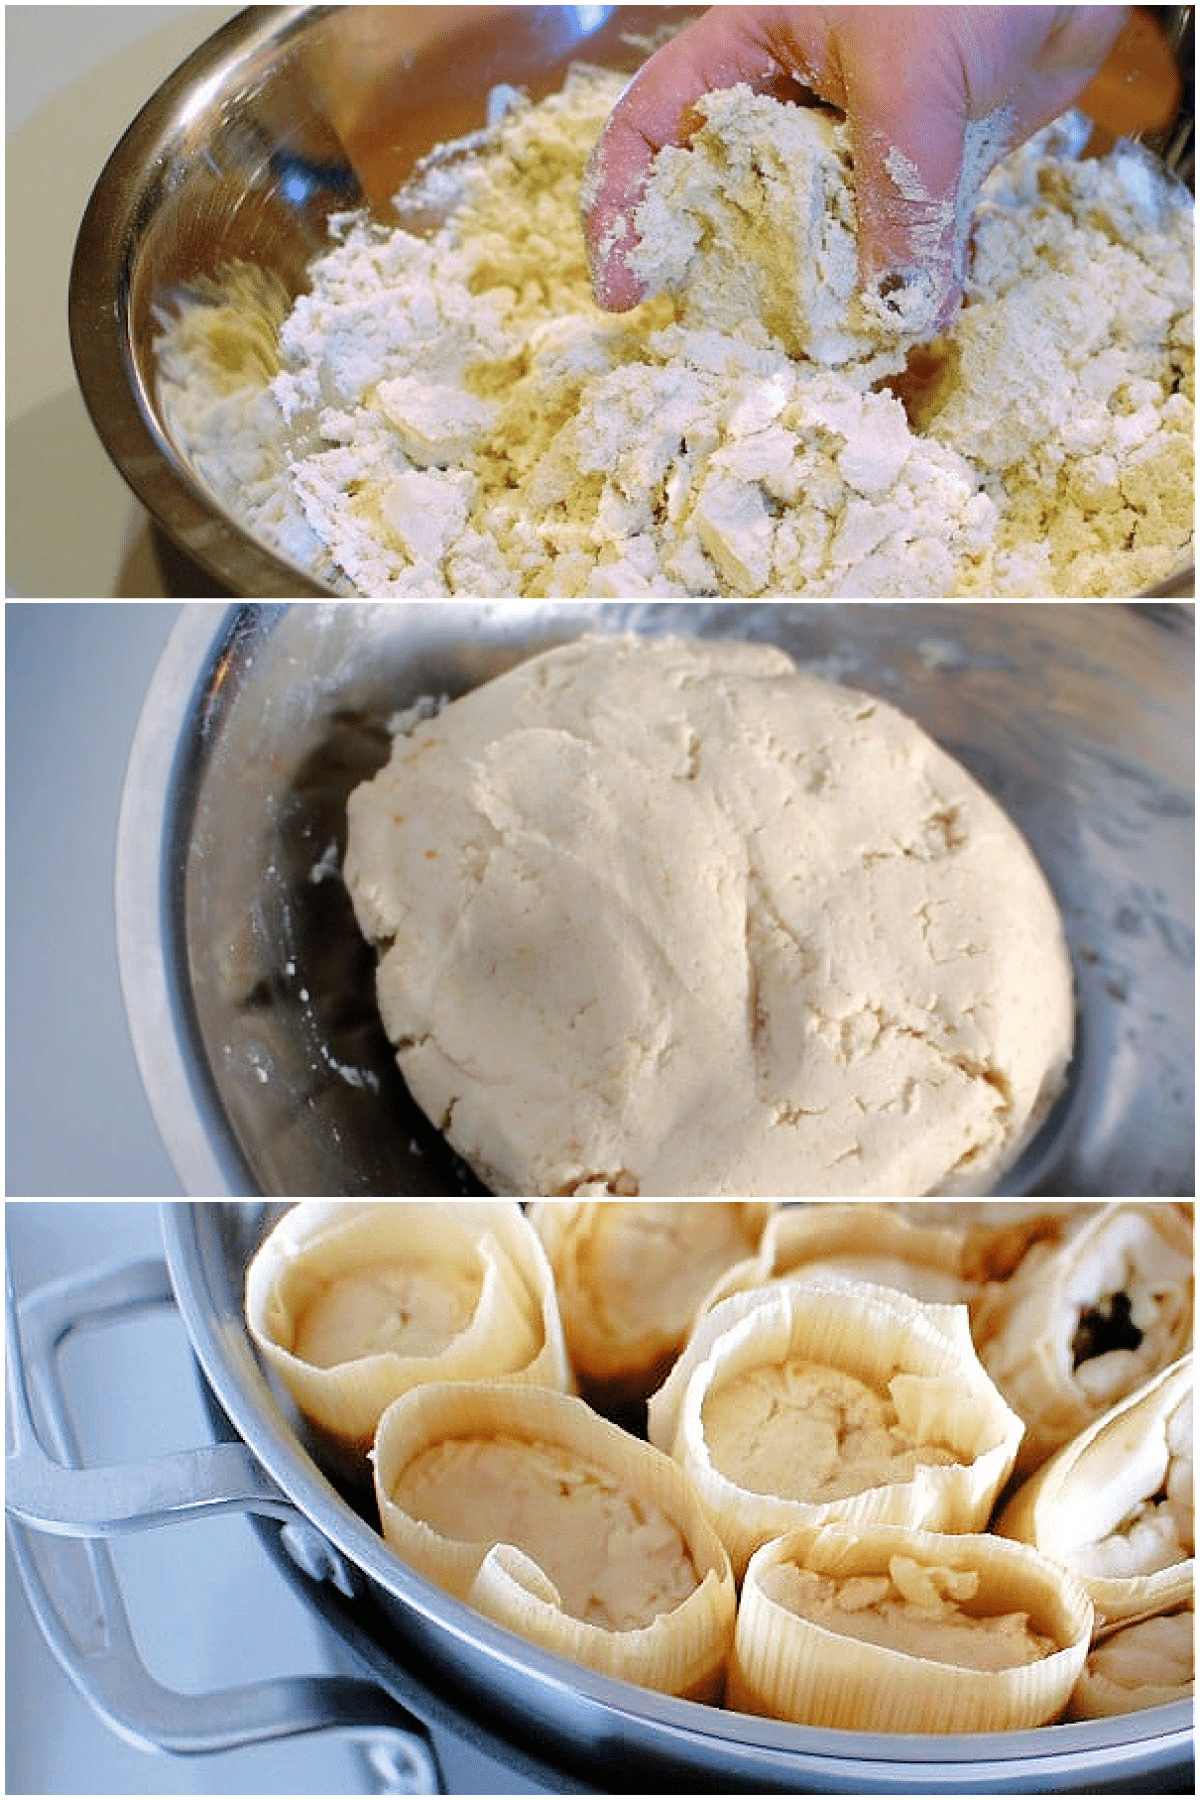 Three photo collage showing how to make masa and tamales: a hand crumbling the masa flour and water, a masa tamale dough ball in a large bowl, a large pot of steaming tamales.